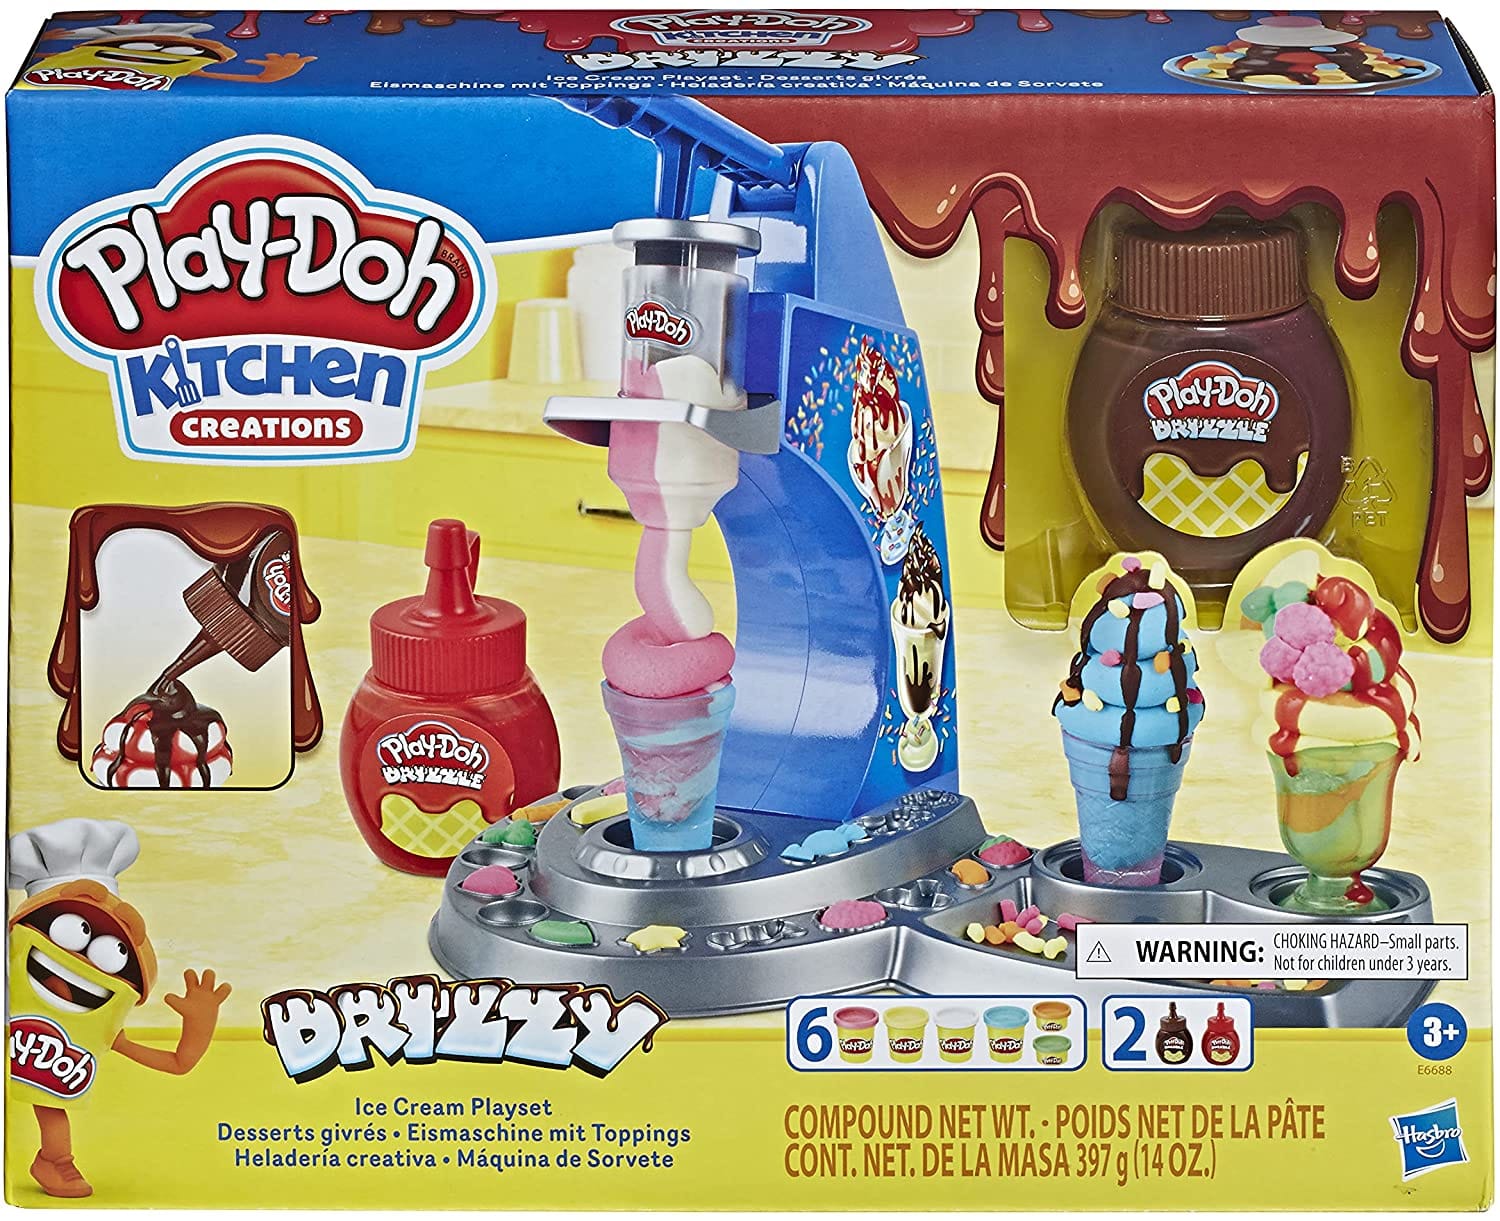 HASBRO Playdoh Drizzy Ice Cream Playset: Squeeze a little on top of your Play-Doh desserts to make your Play-Doh creations into the best version of themselves - E6688